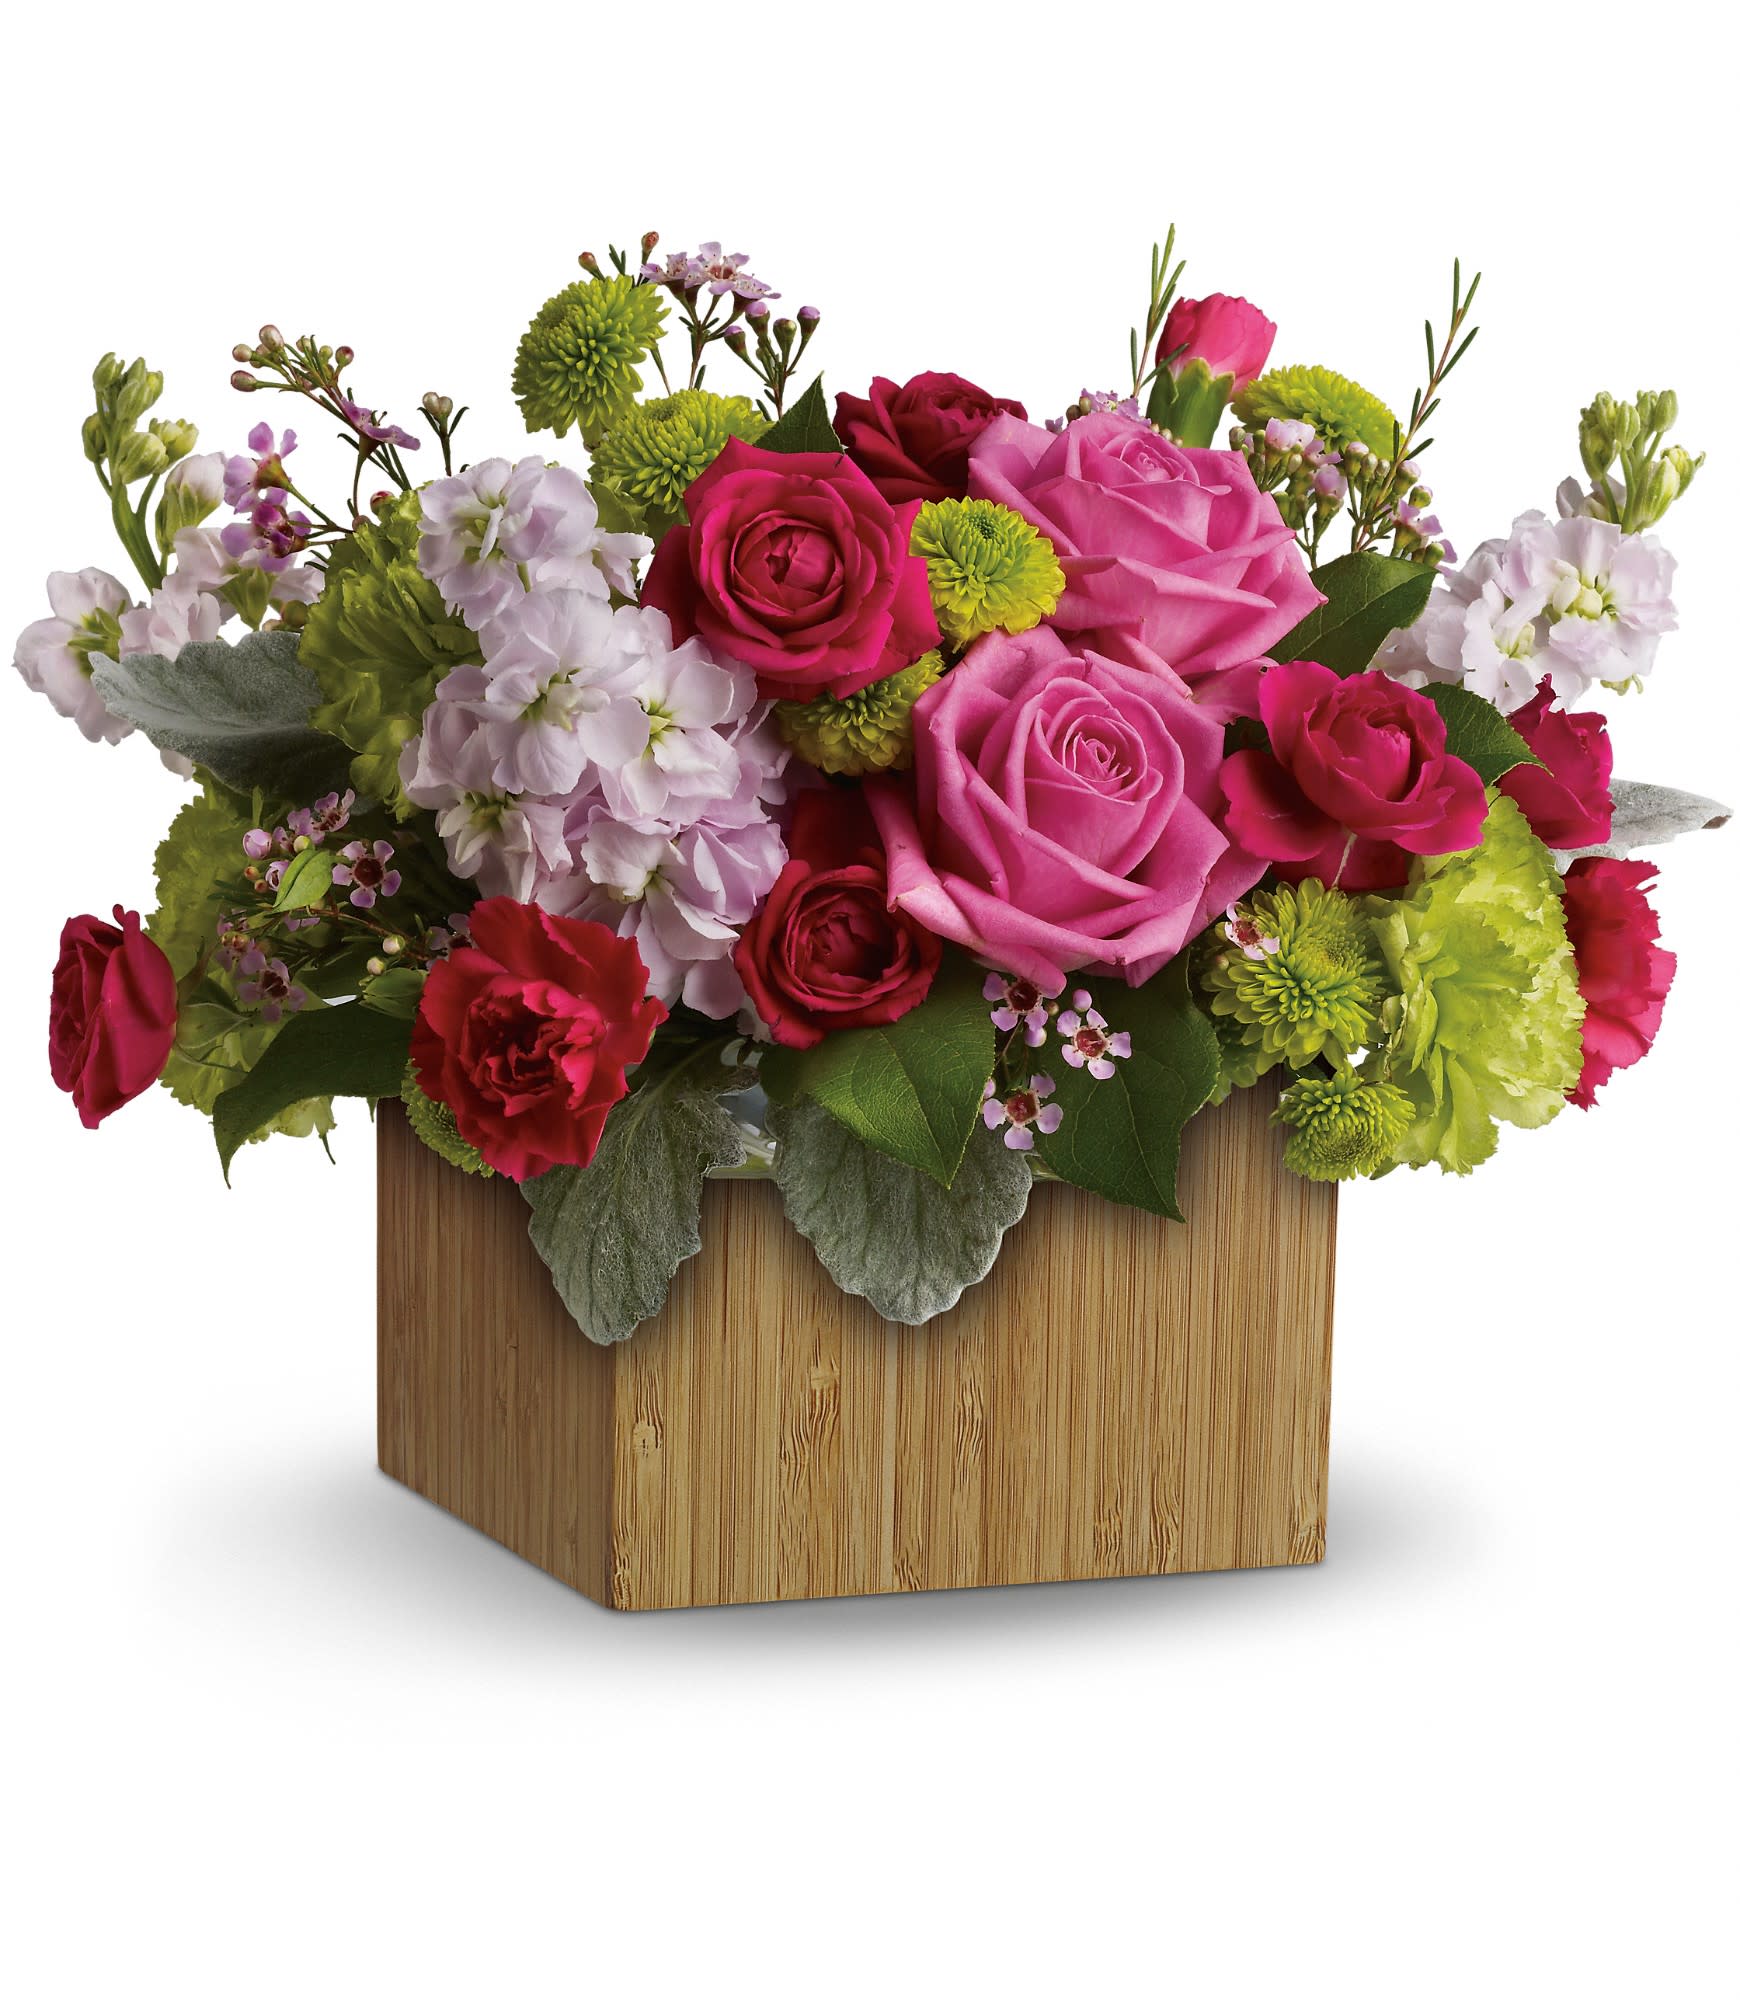 Garden Delights - Put a smile on her face and a spring in her step with this delightful little garden bouquet. Presented in a chic bamboo box, its happy hot pinks and lovely lime greens give a colorful pick-me-up! 